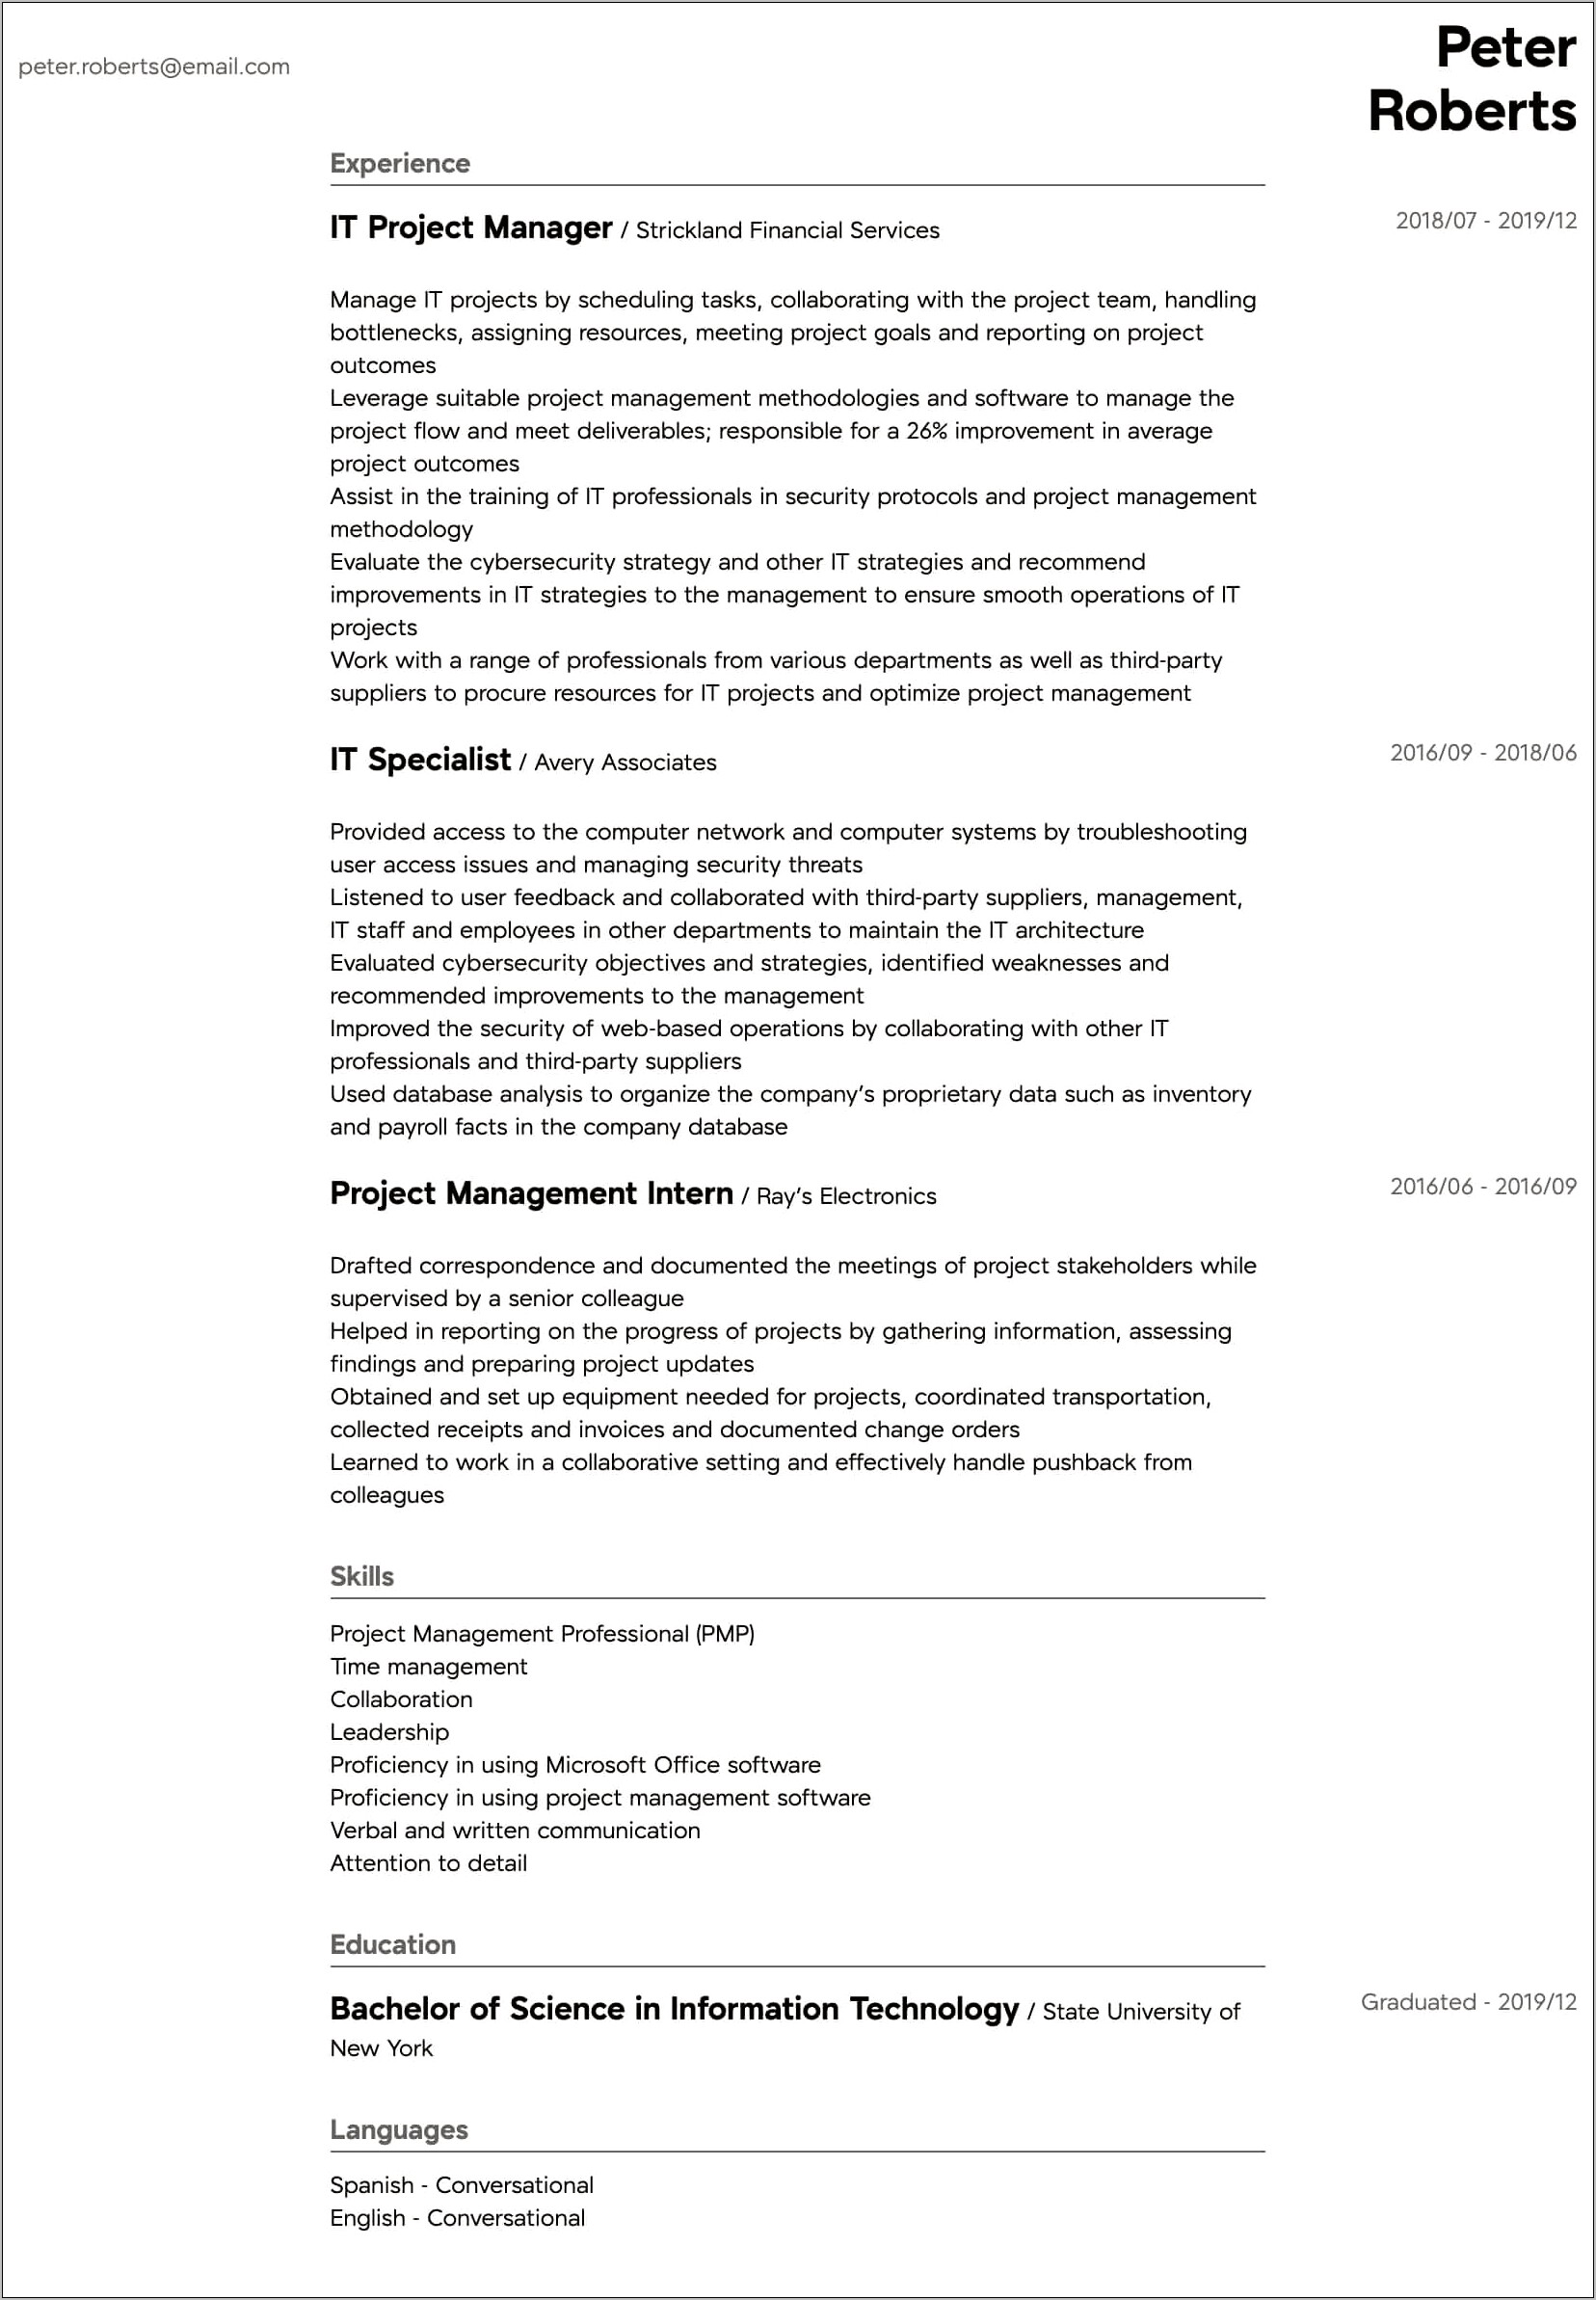 Resume Qualifications Examples Information Technology